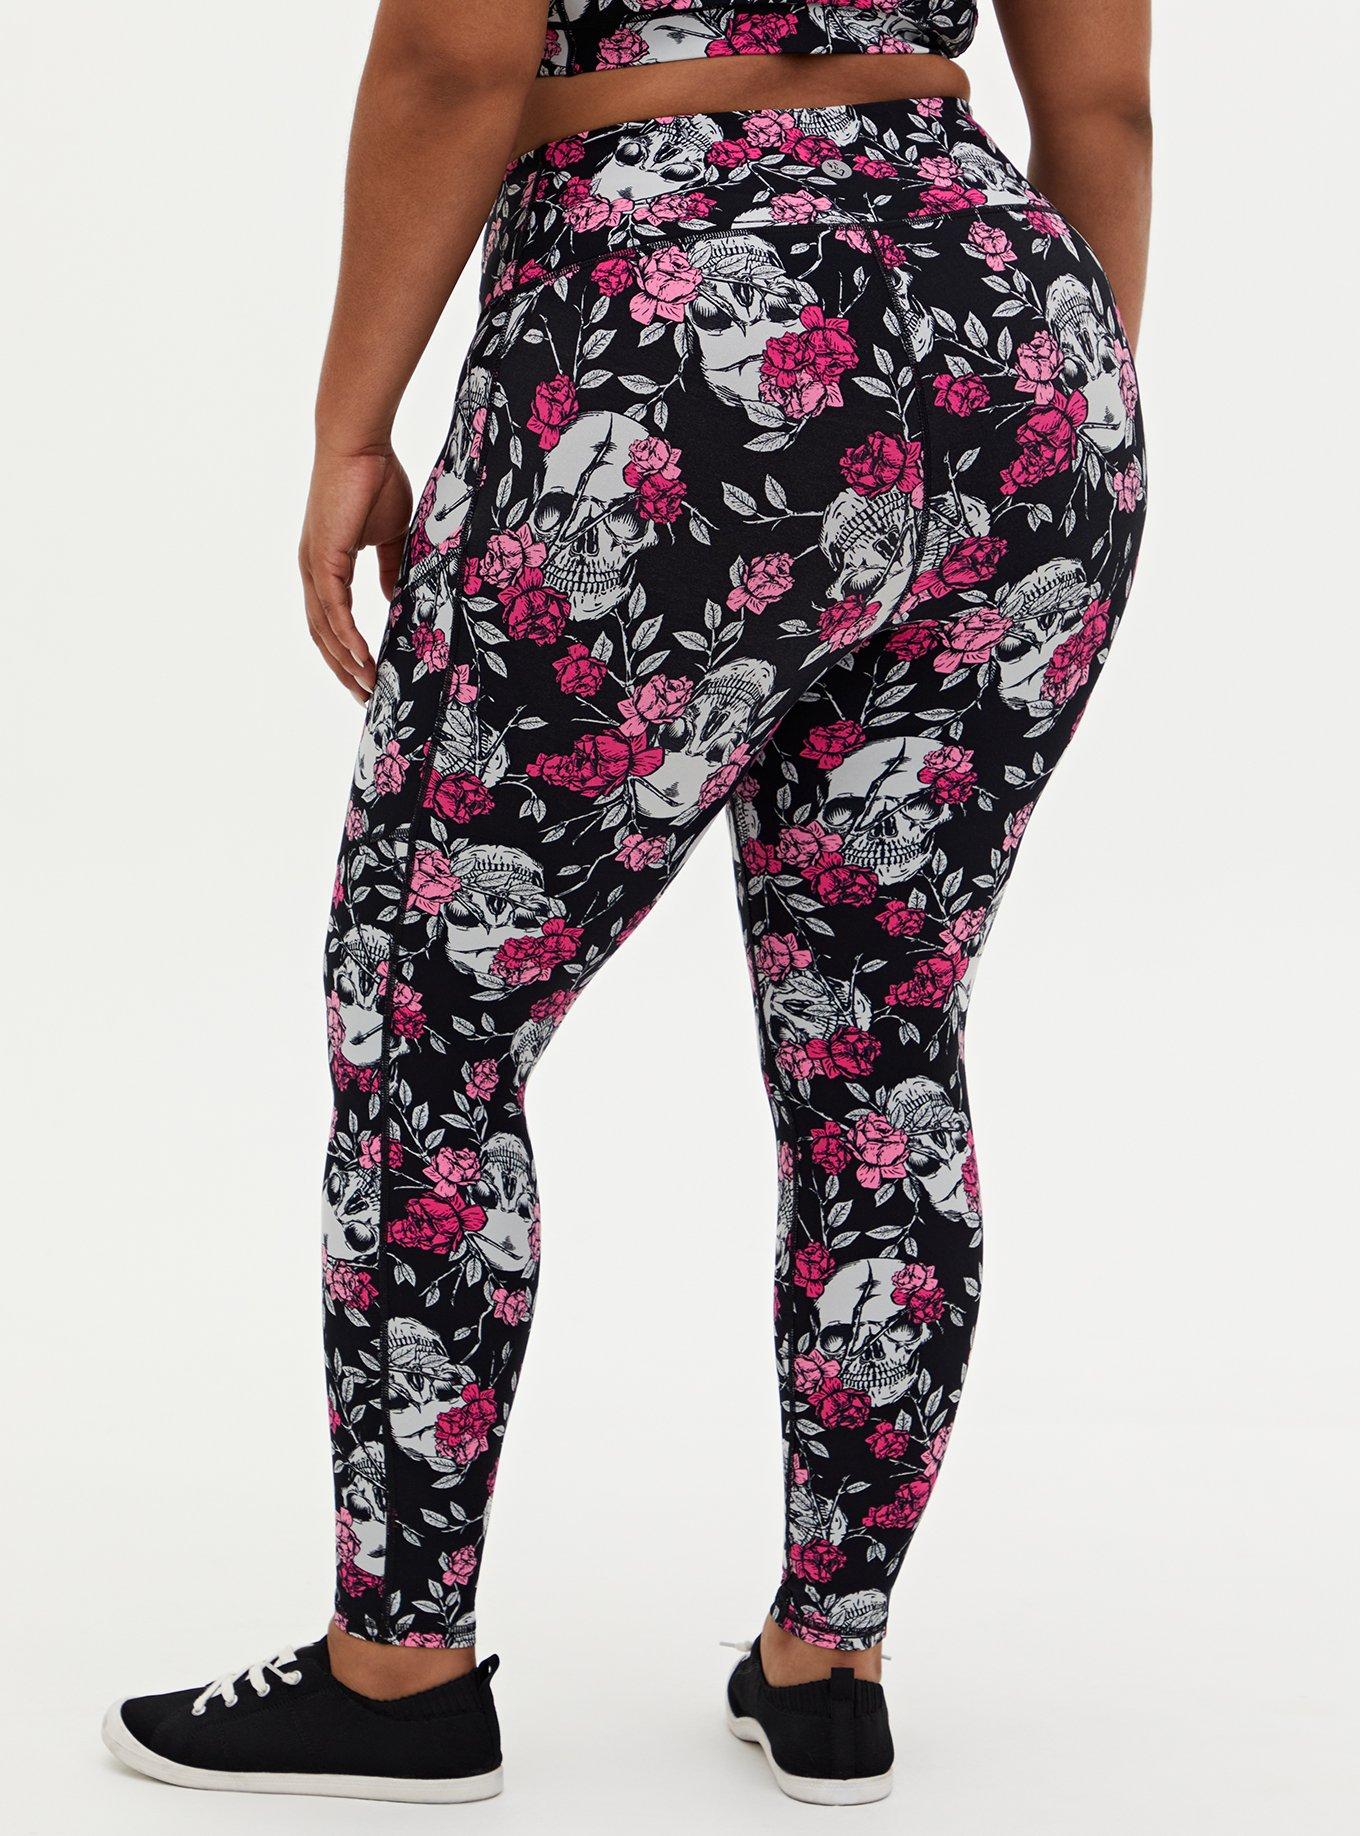 Plus Size - Performance Core Full Length Active Legging With Side Panels -  Torrid